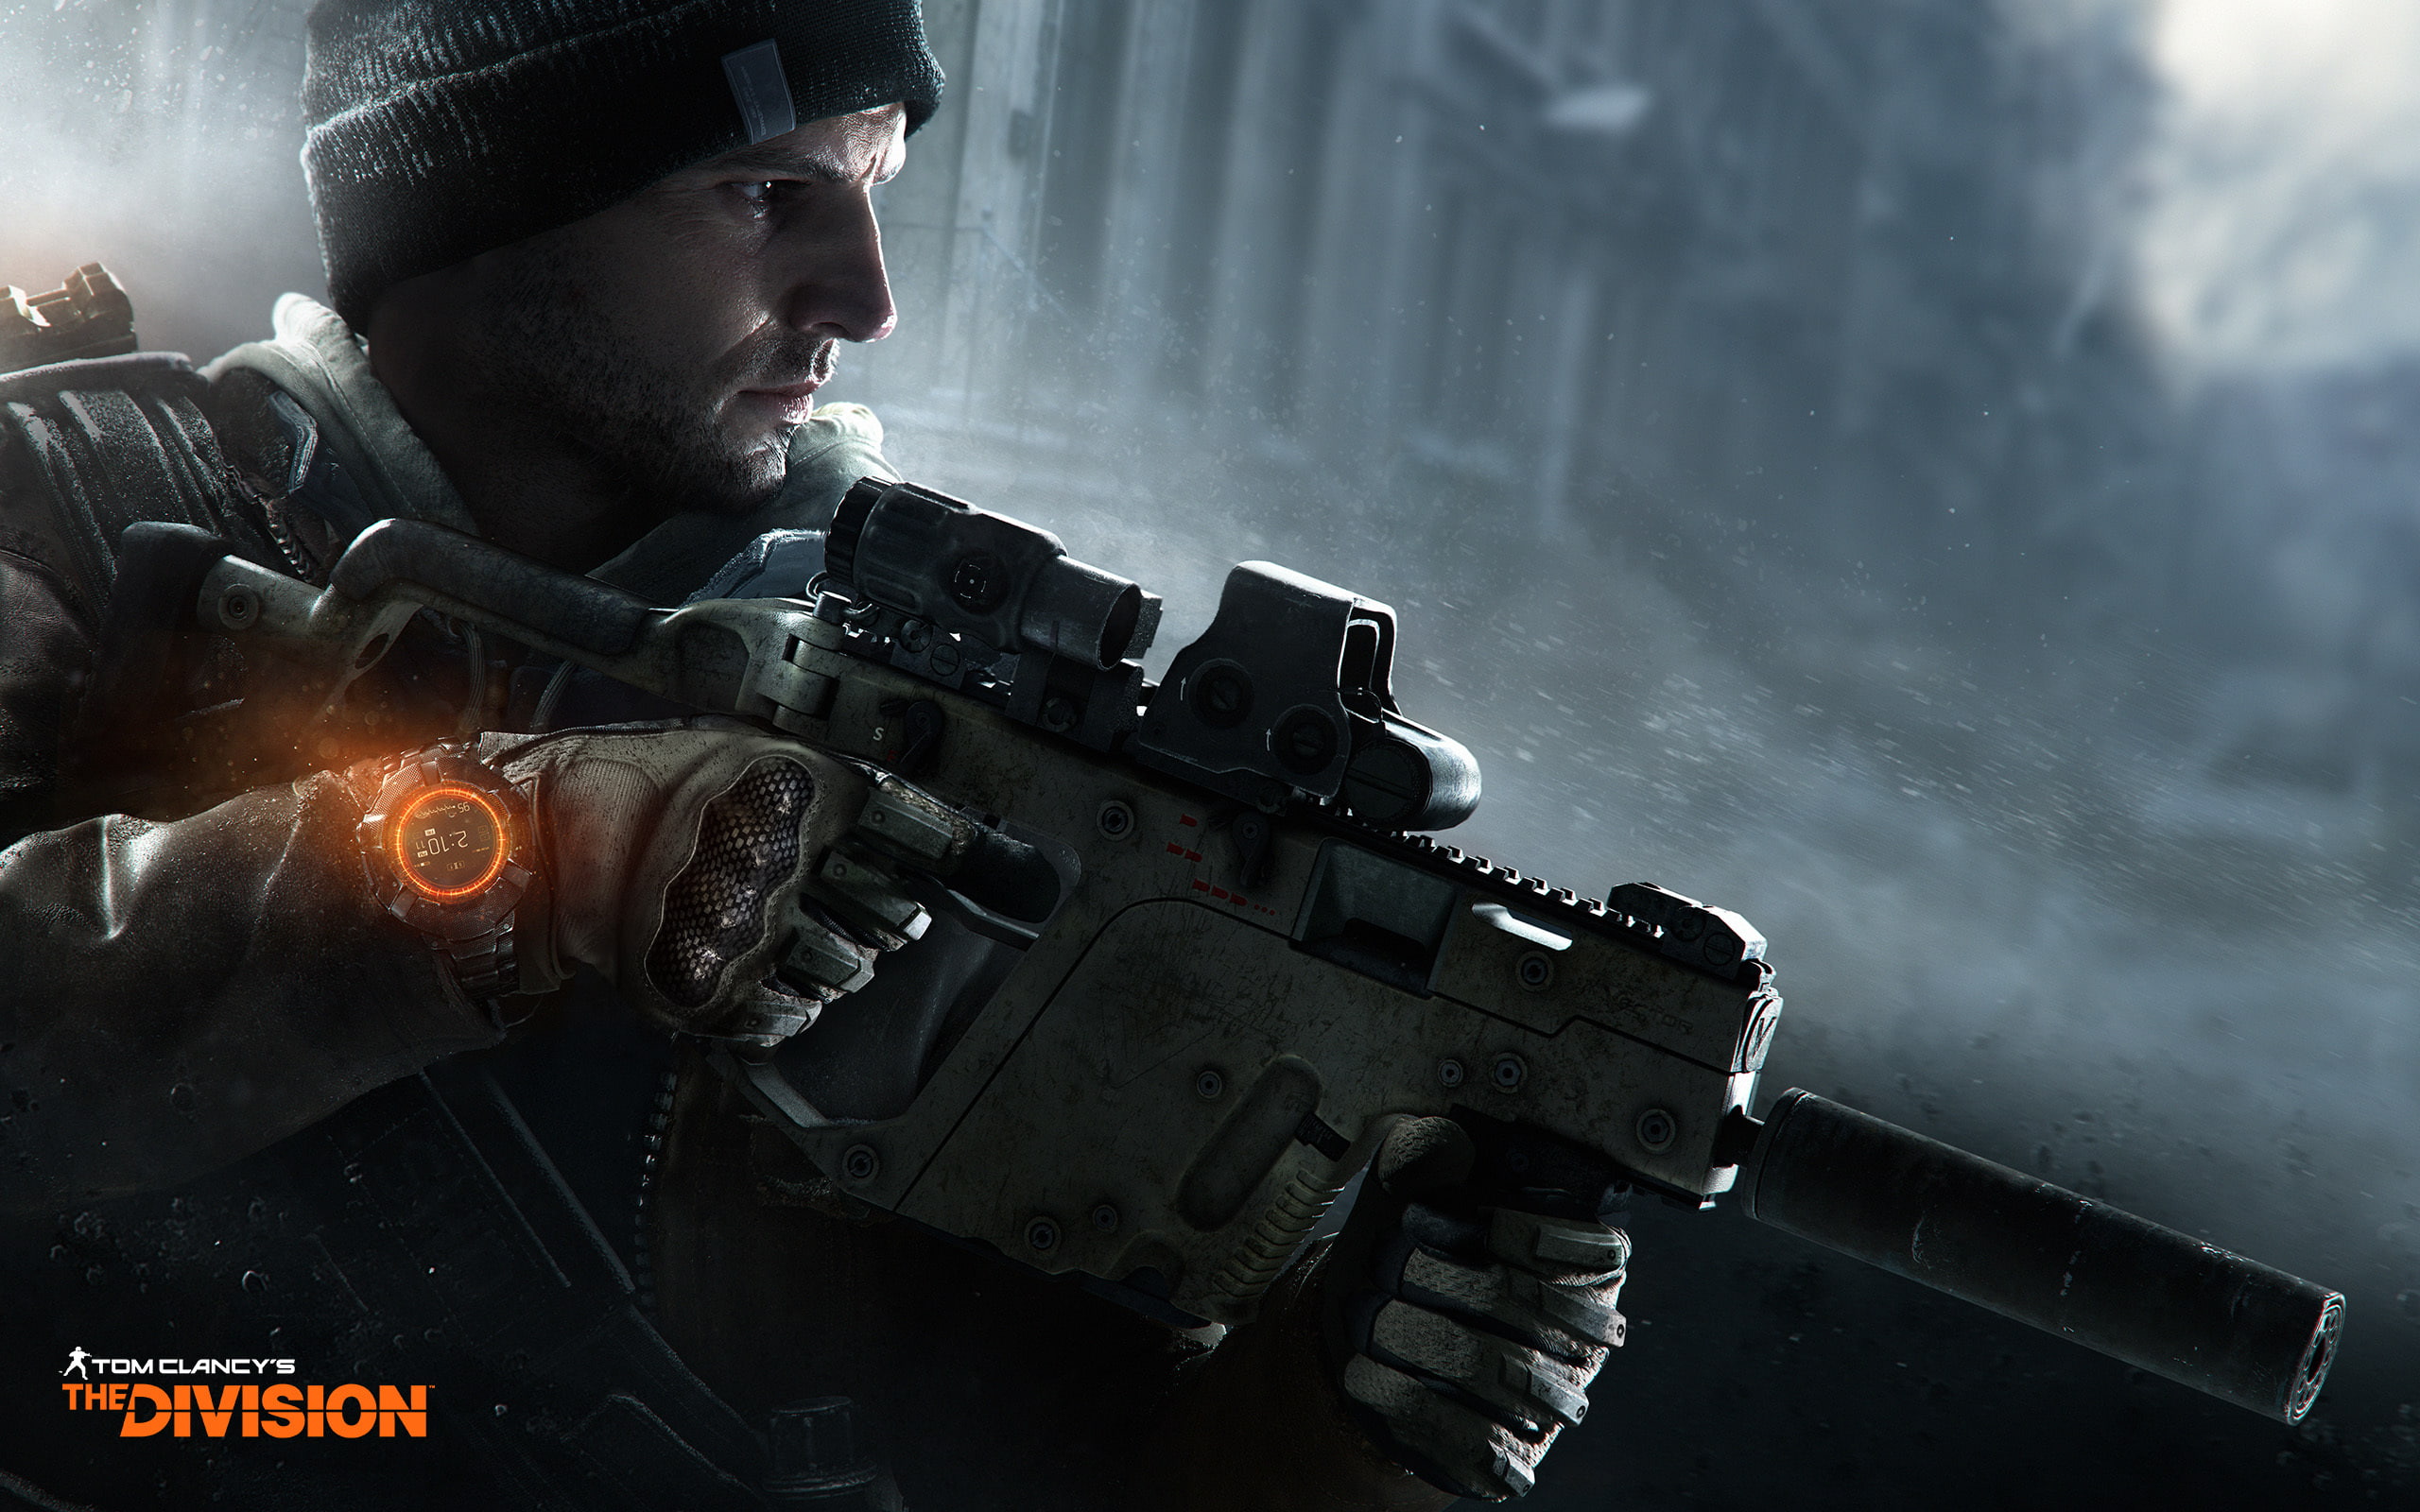 snow, weapons, hat, watch, soldiers, gloves, agent, fighter